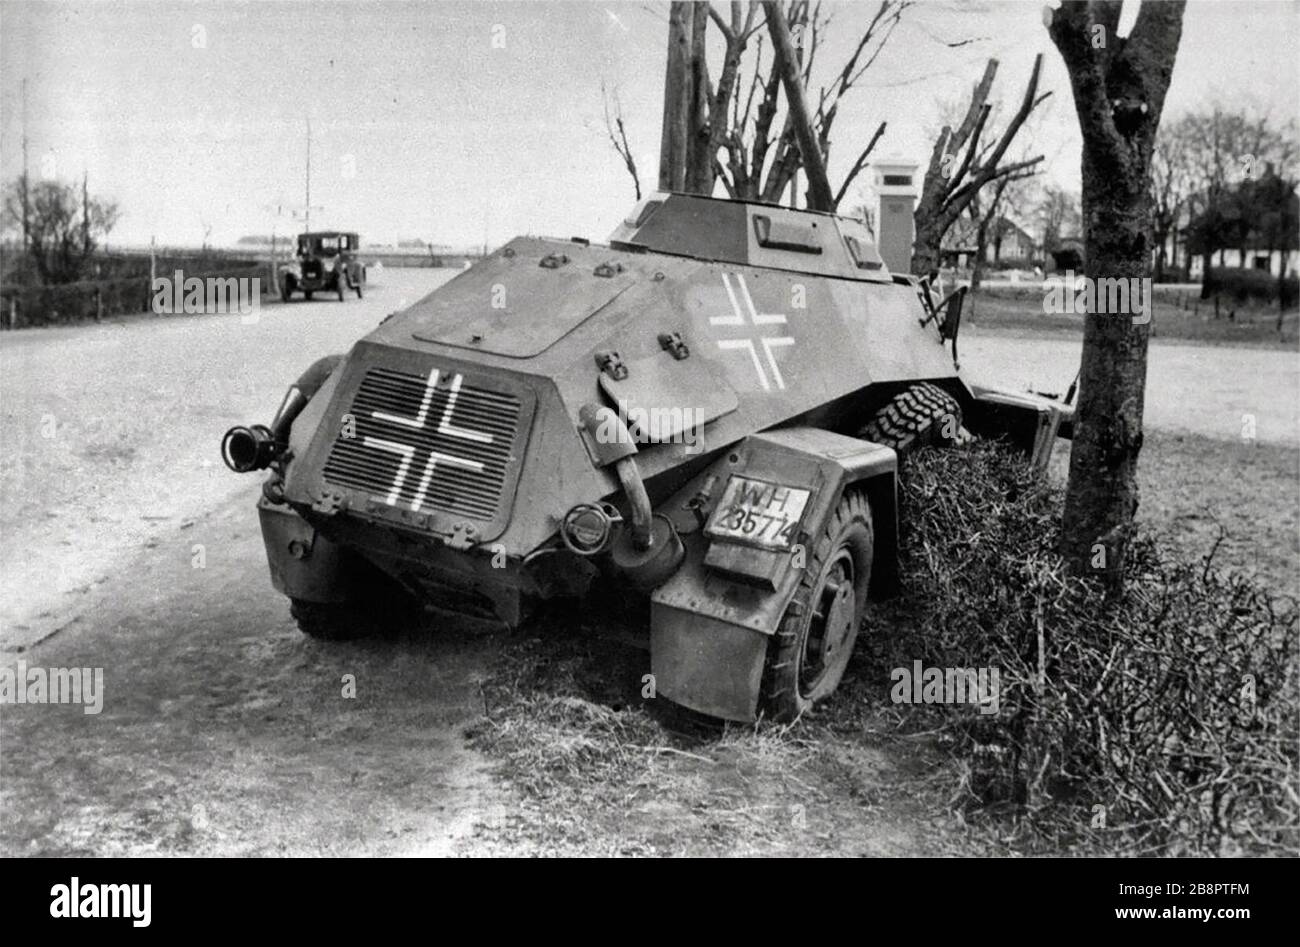 A Leichter Panzerspähwagen Sd. Kfz. 221 lies knocked out in Bredevad on April 9th, 1940 Stock Photo